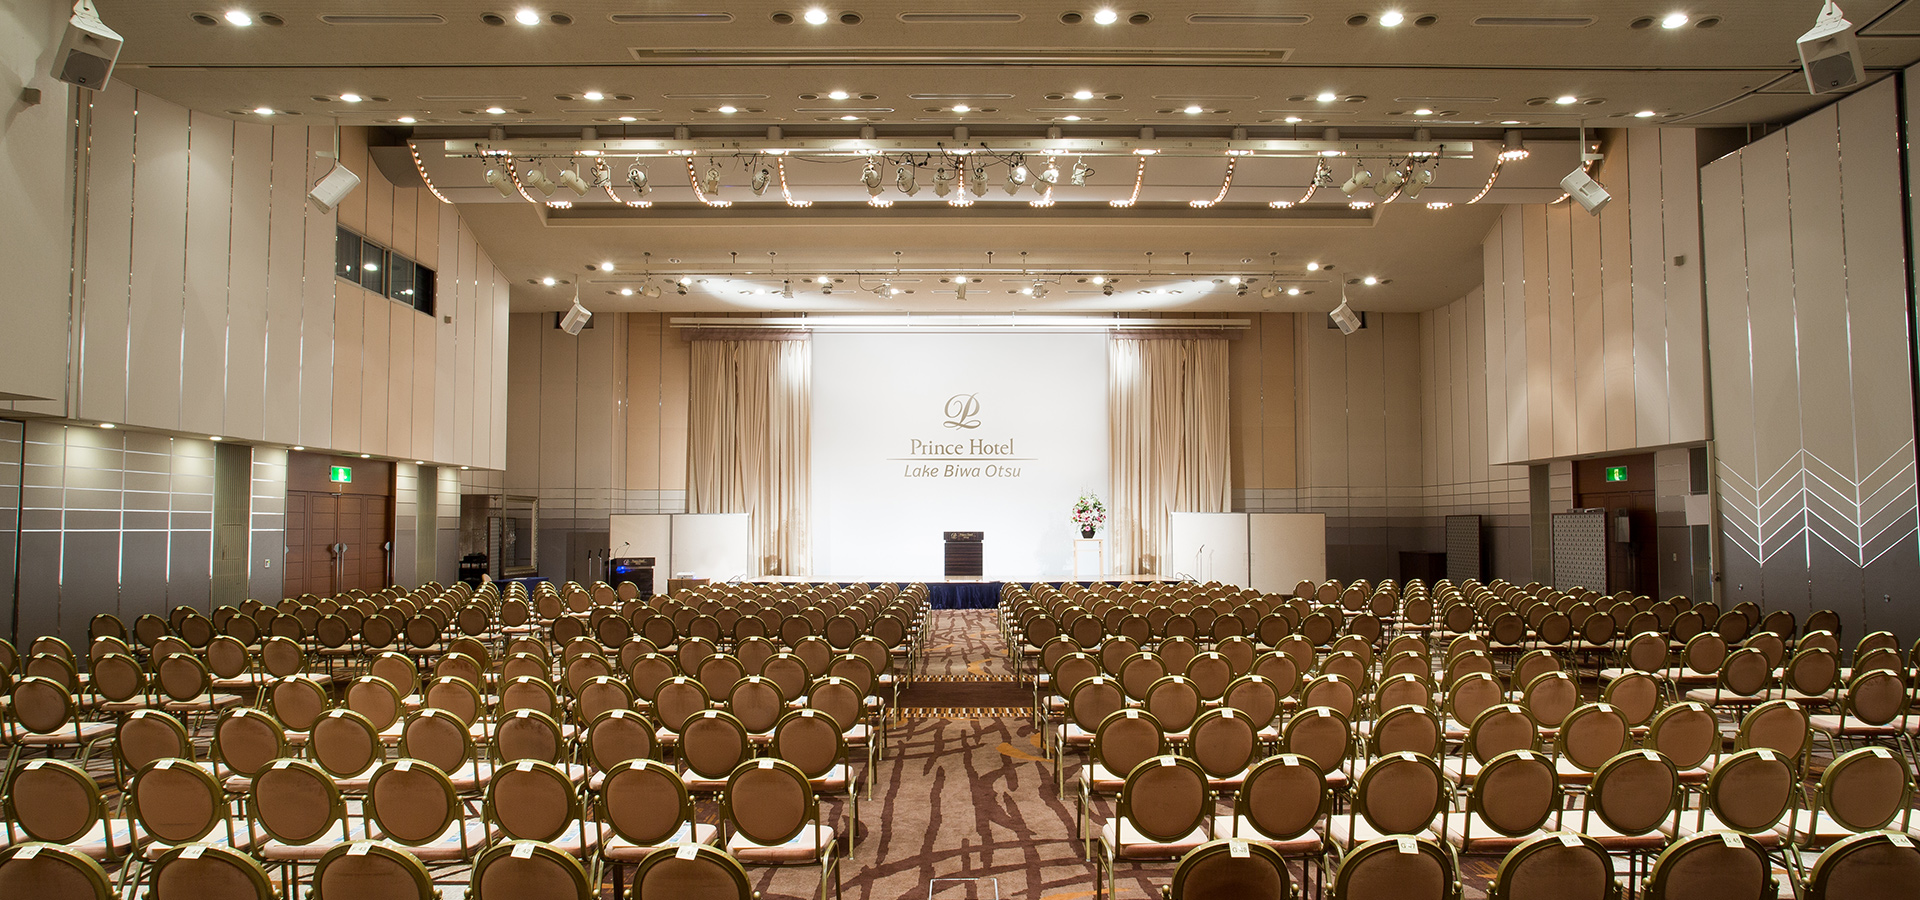 Convention Hall “Oumi” 2F